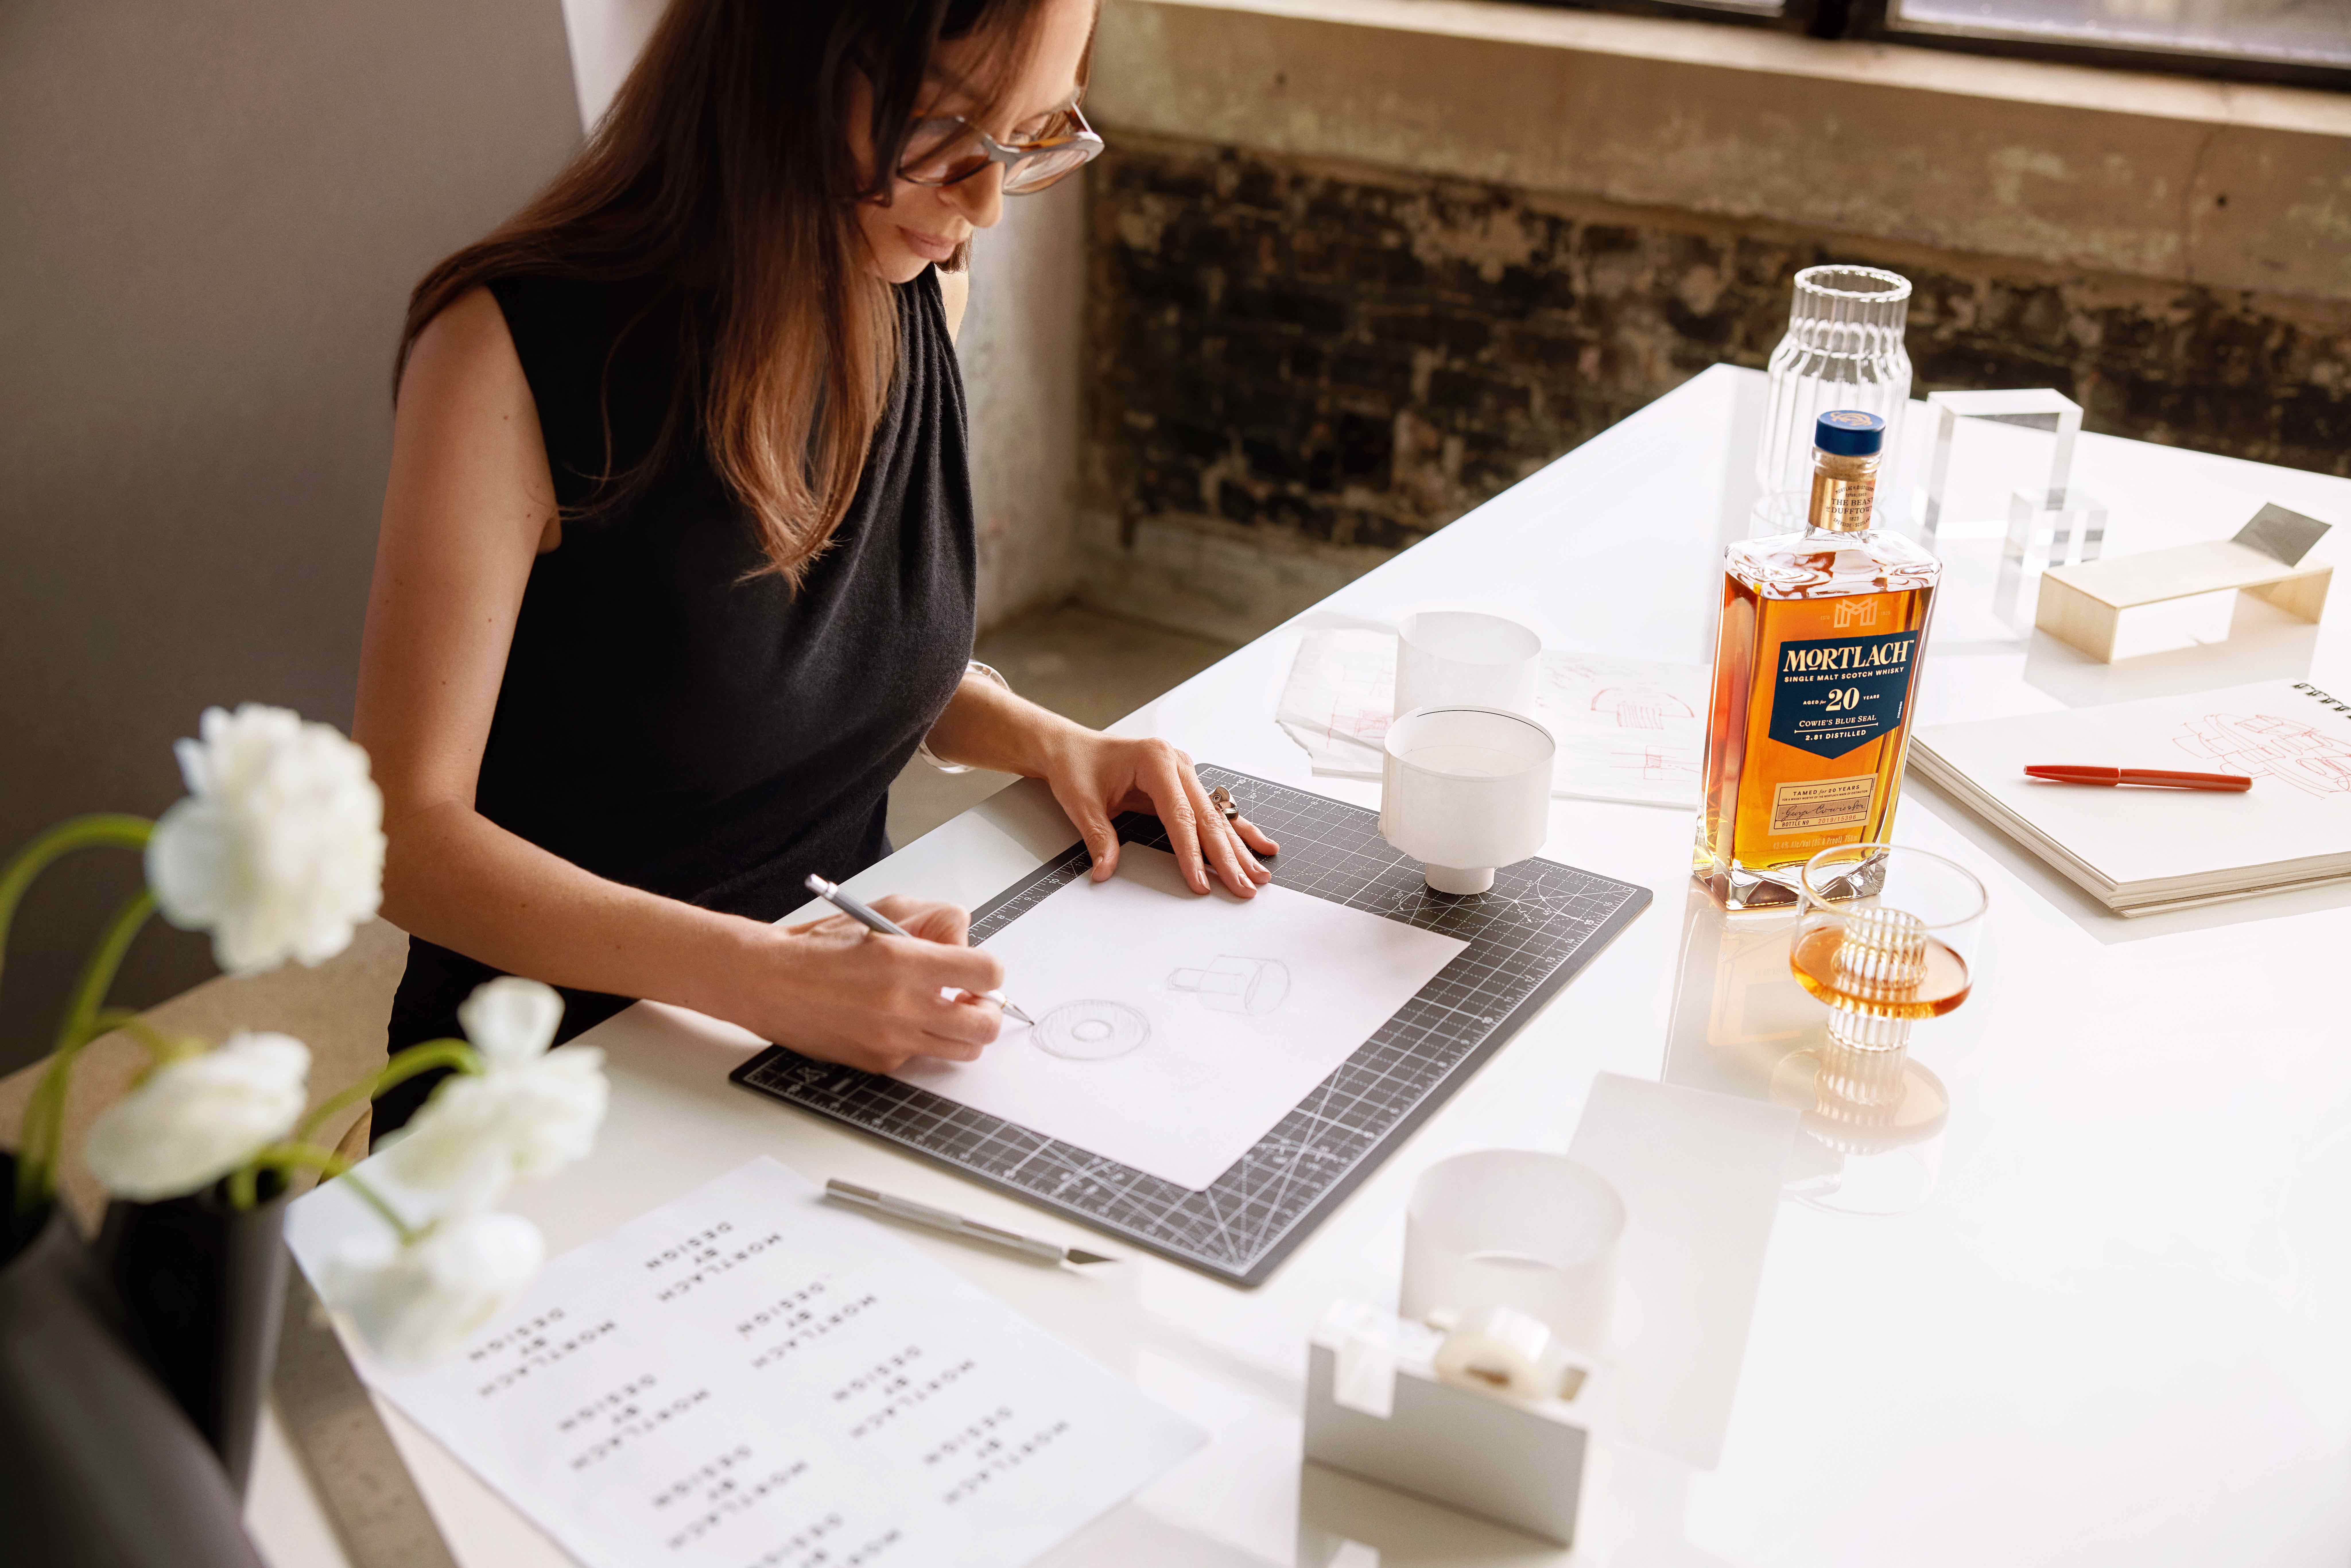 Designer Felicia Ferrone sketching, with Mortlach whisky and her glass designs on desk